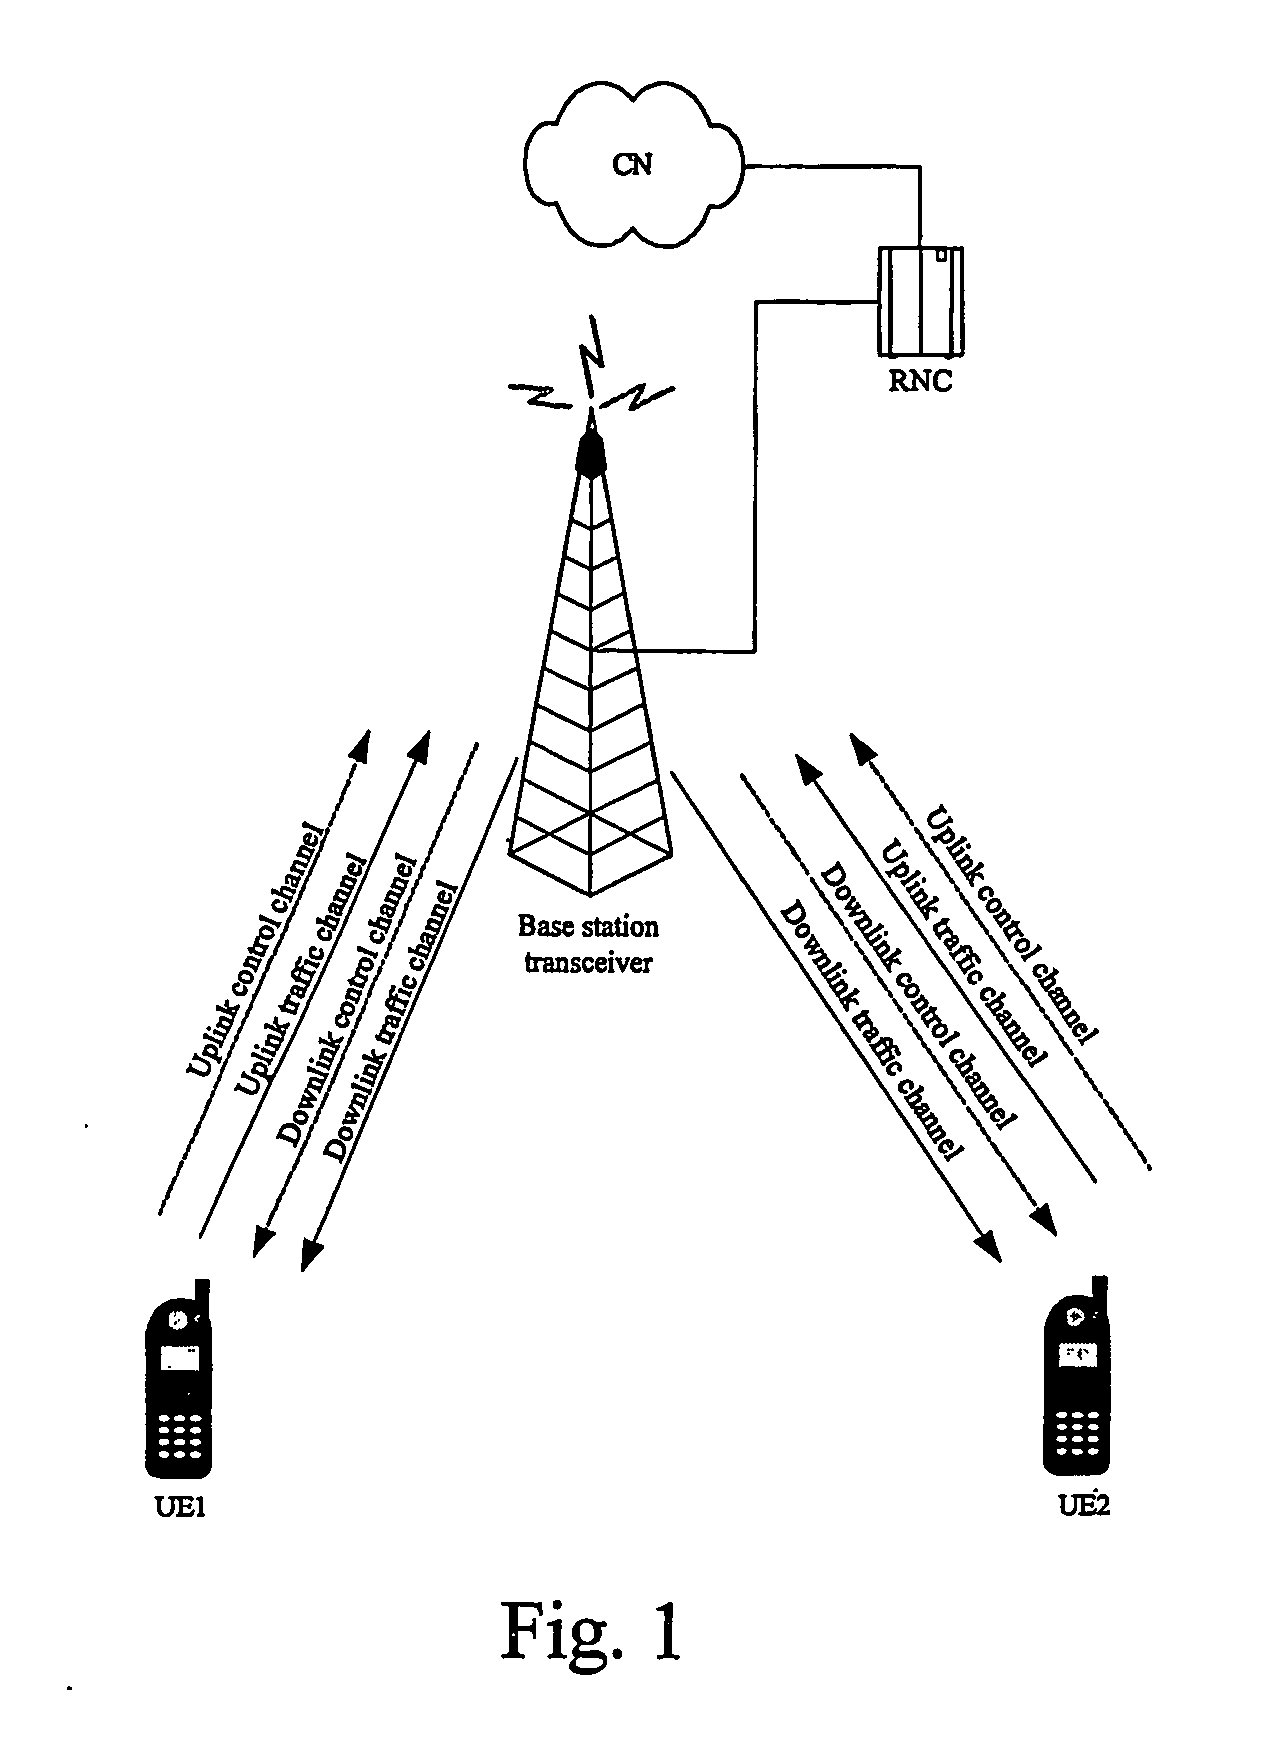 Method and system for maintaining uplink synchronization with peer-to-peer communication in wireless communication system